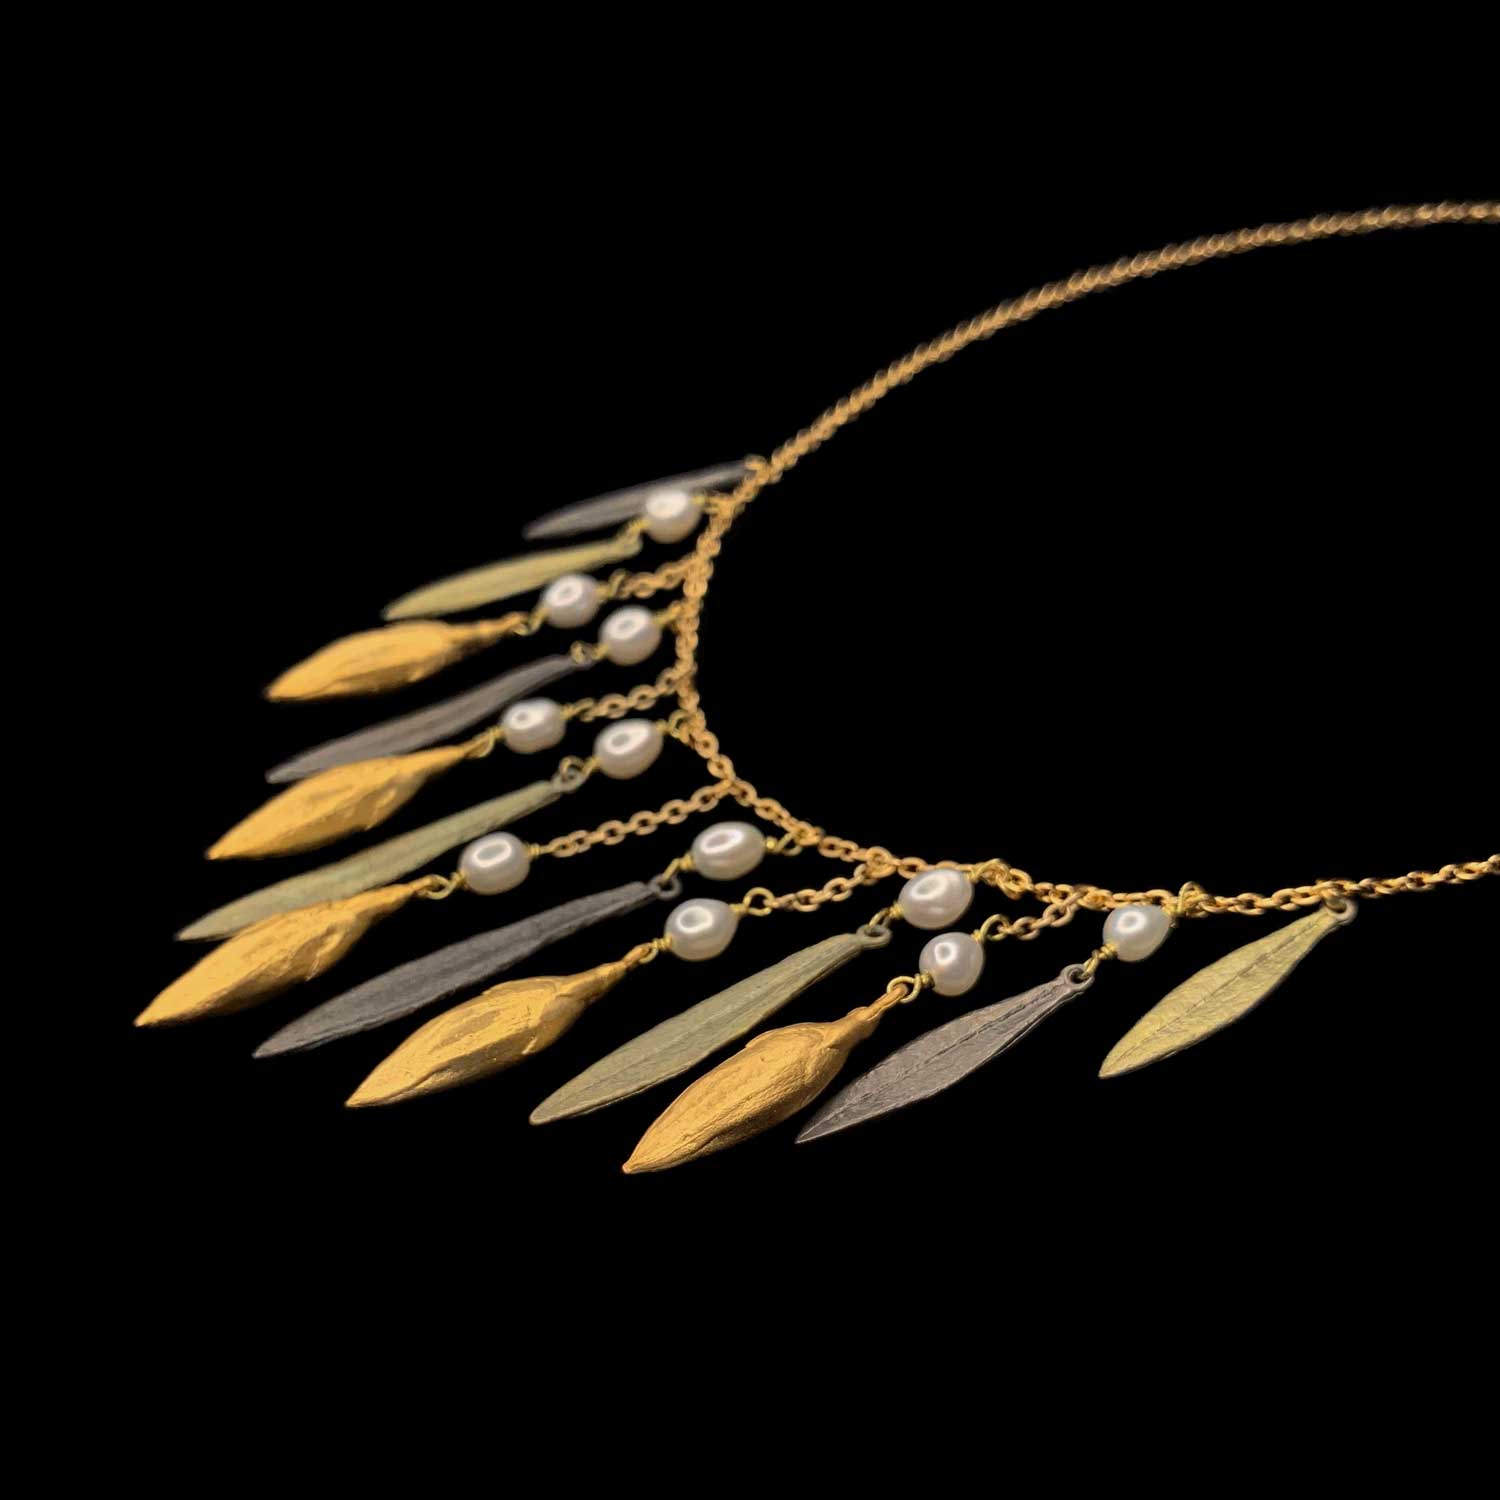 Leaf and Bud Necklace - Statement